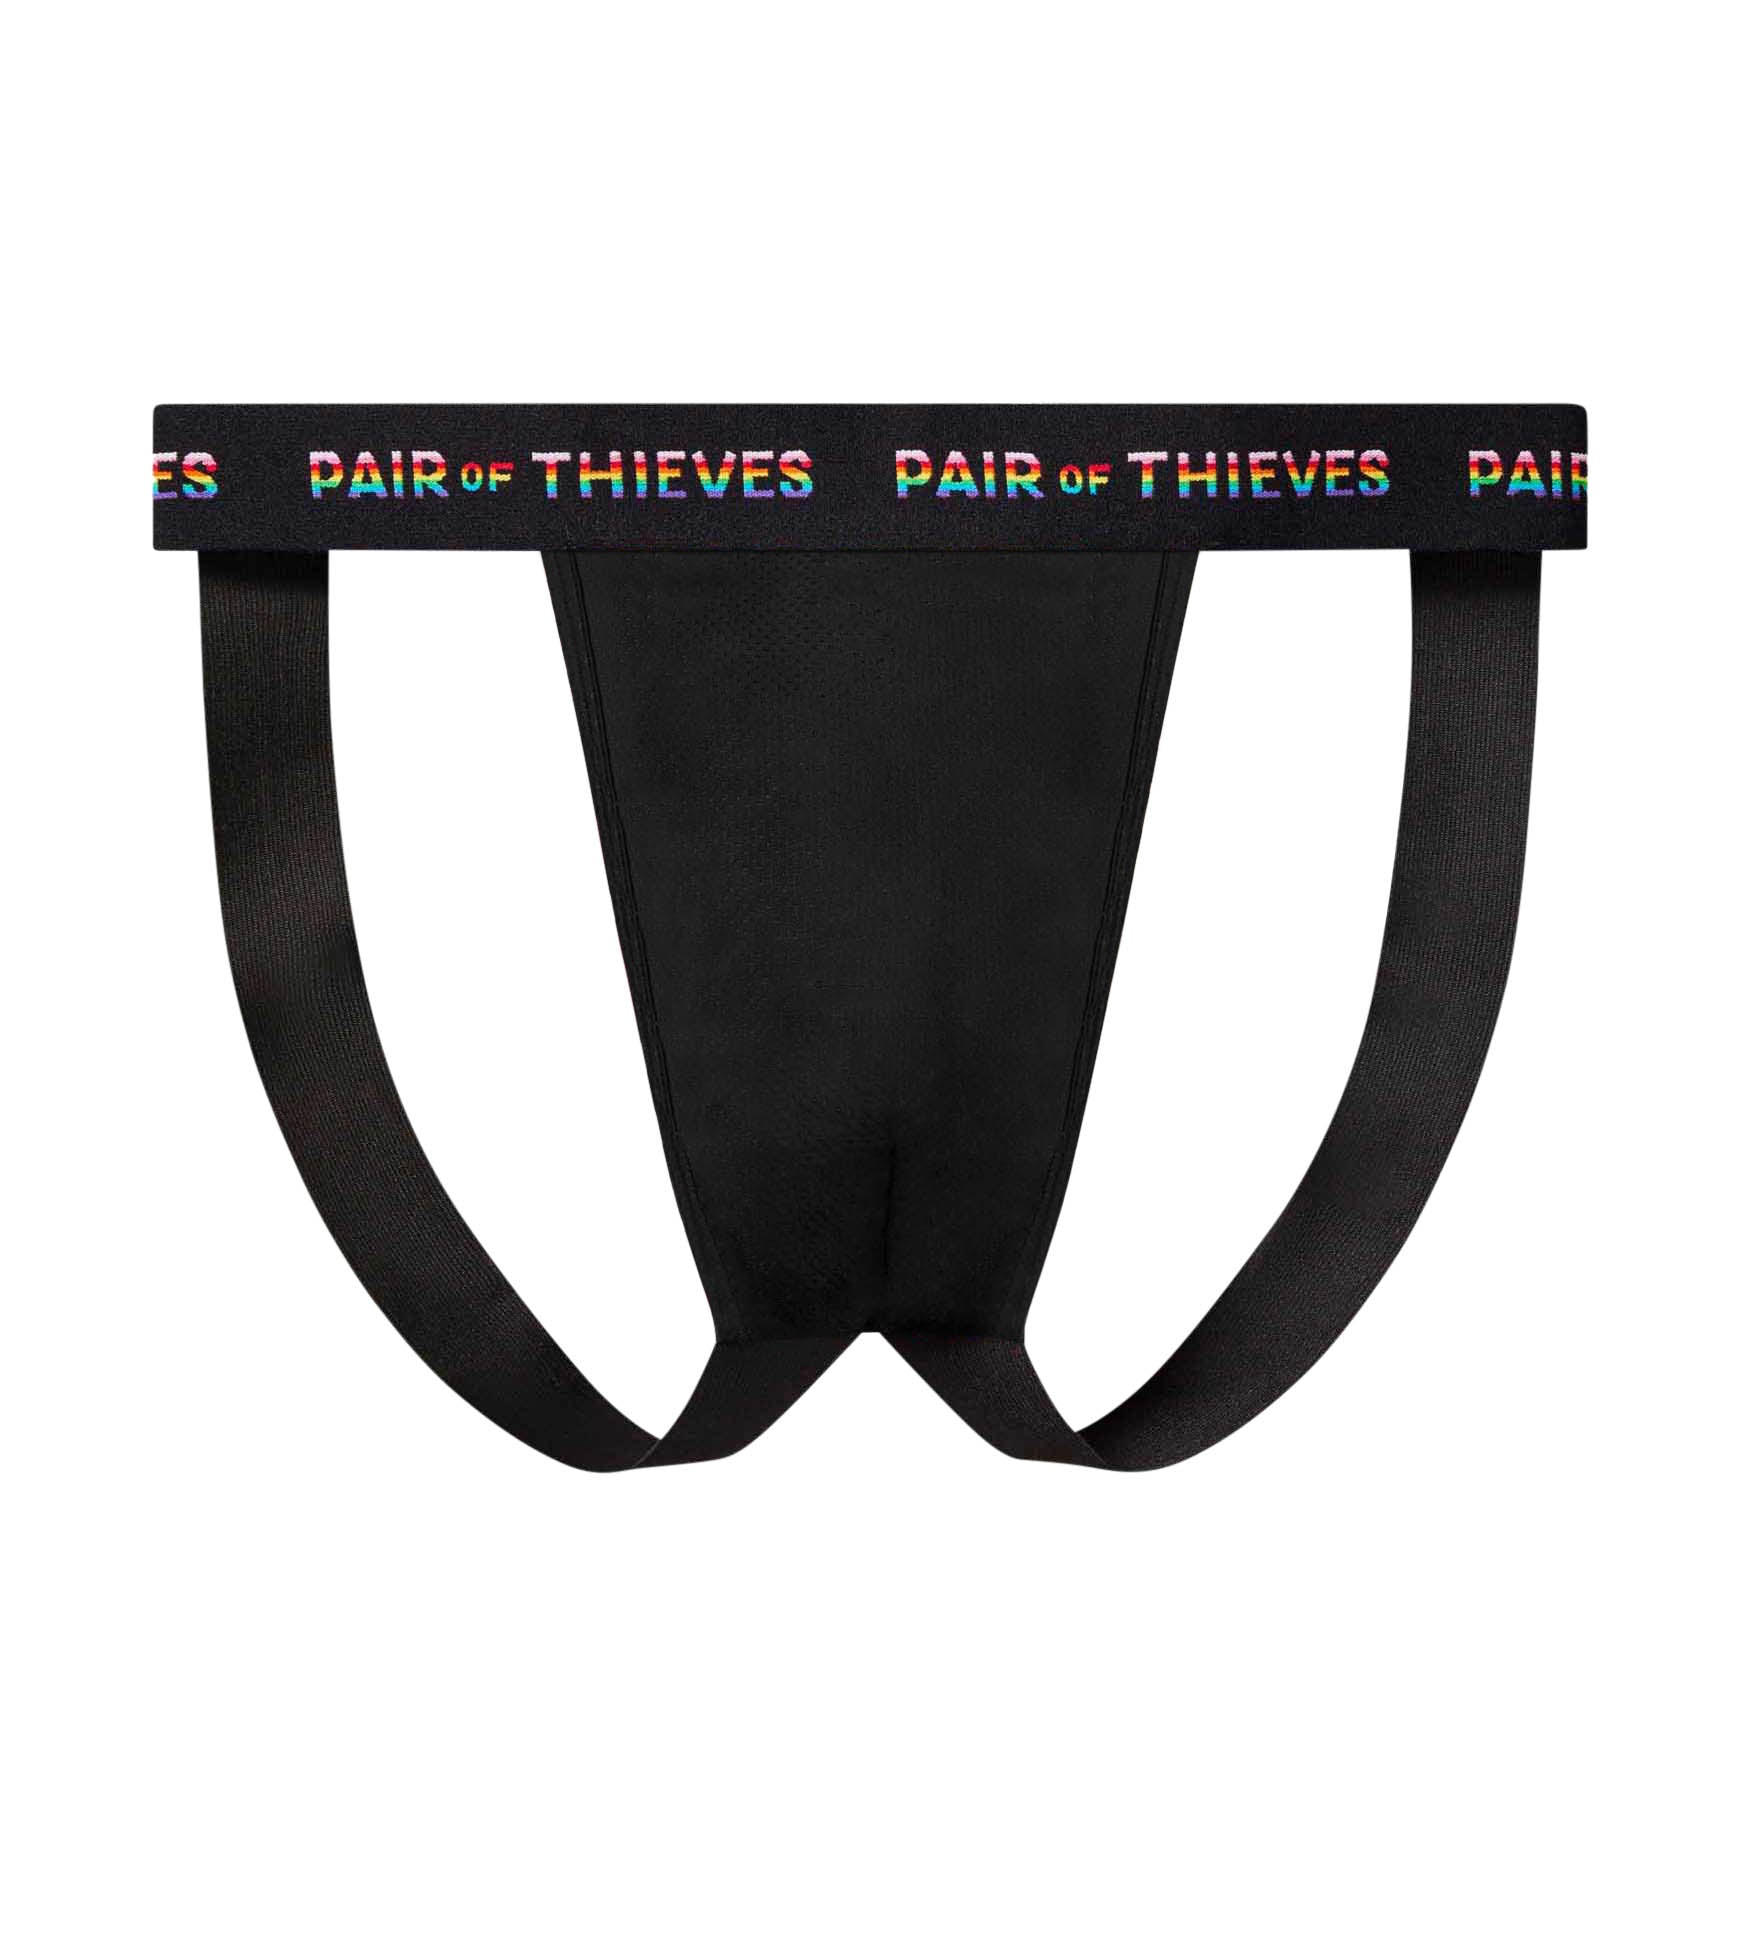 SuperFit Jock Strap Black - in support of The Trevor Project – Pair of  Thieves